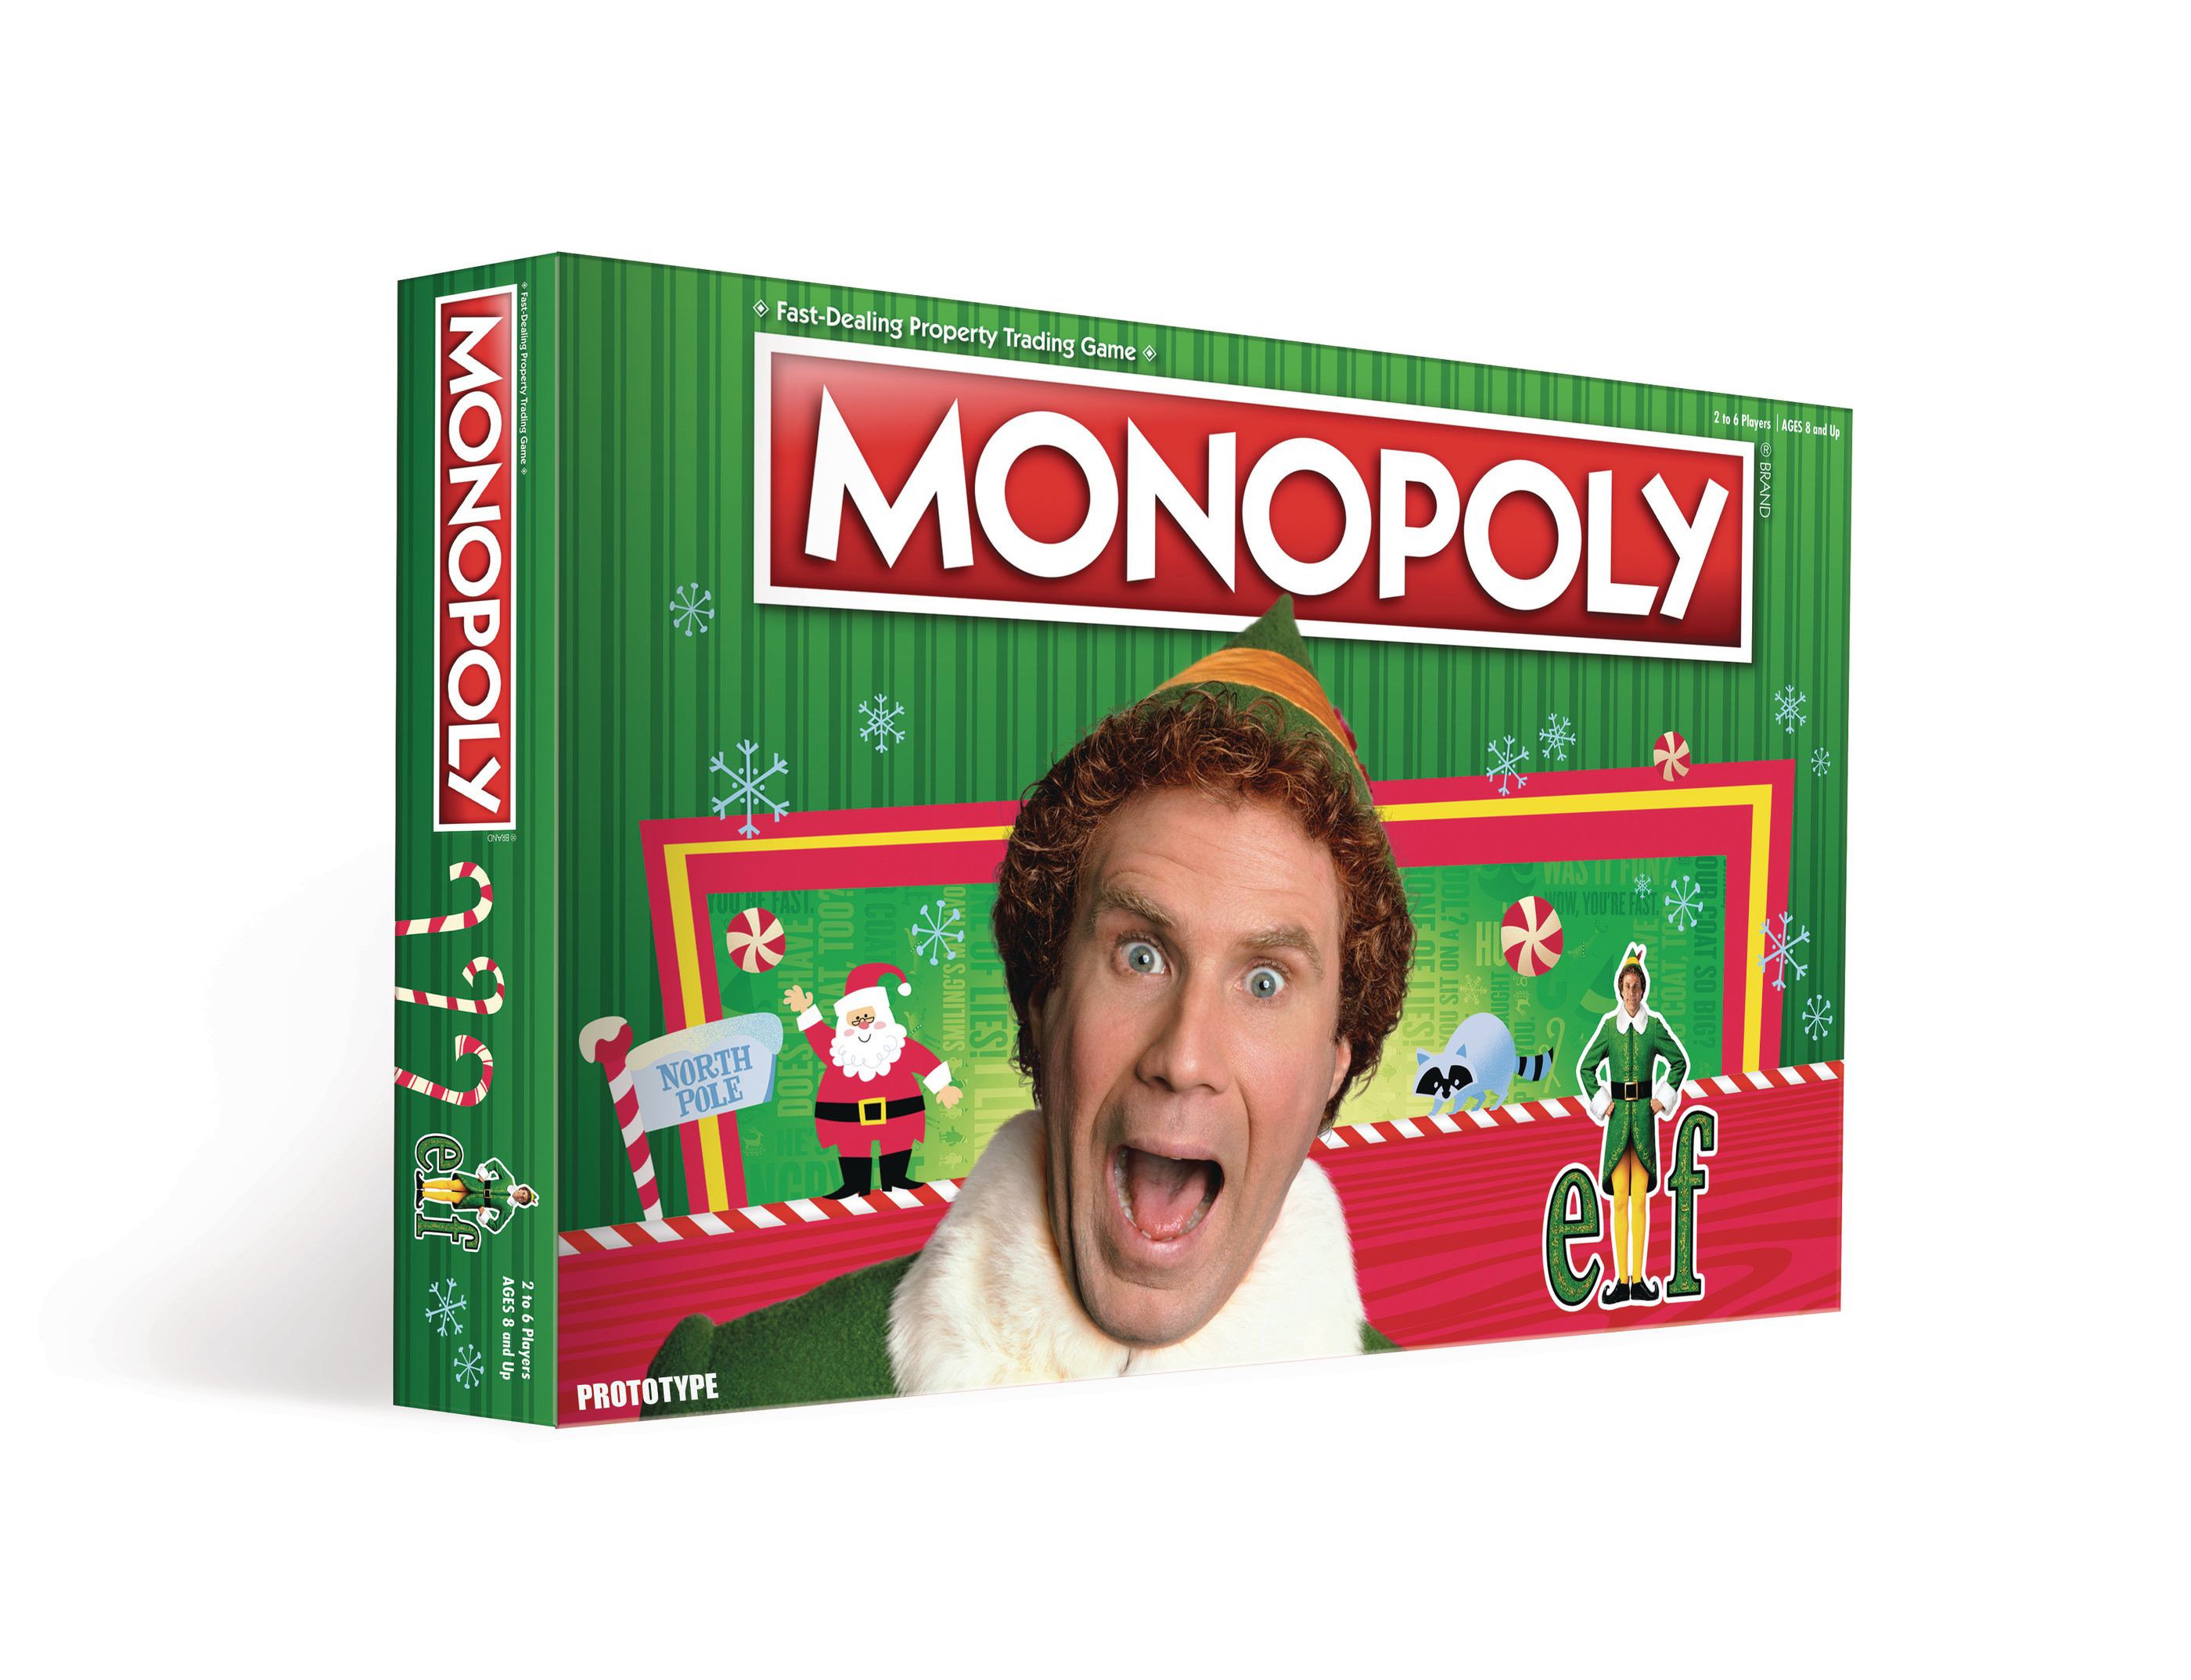 Monopoly Elf Board Game